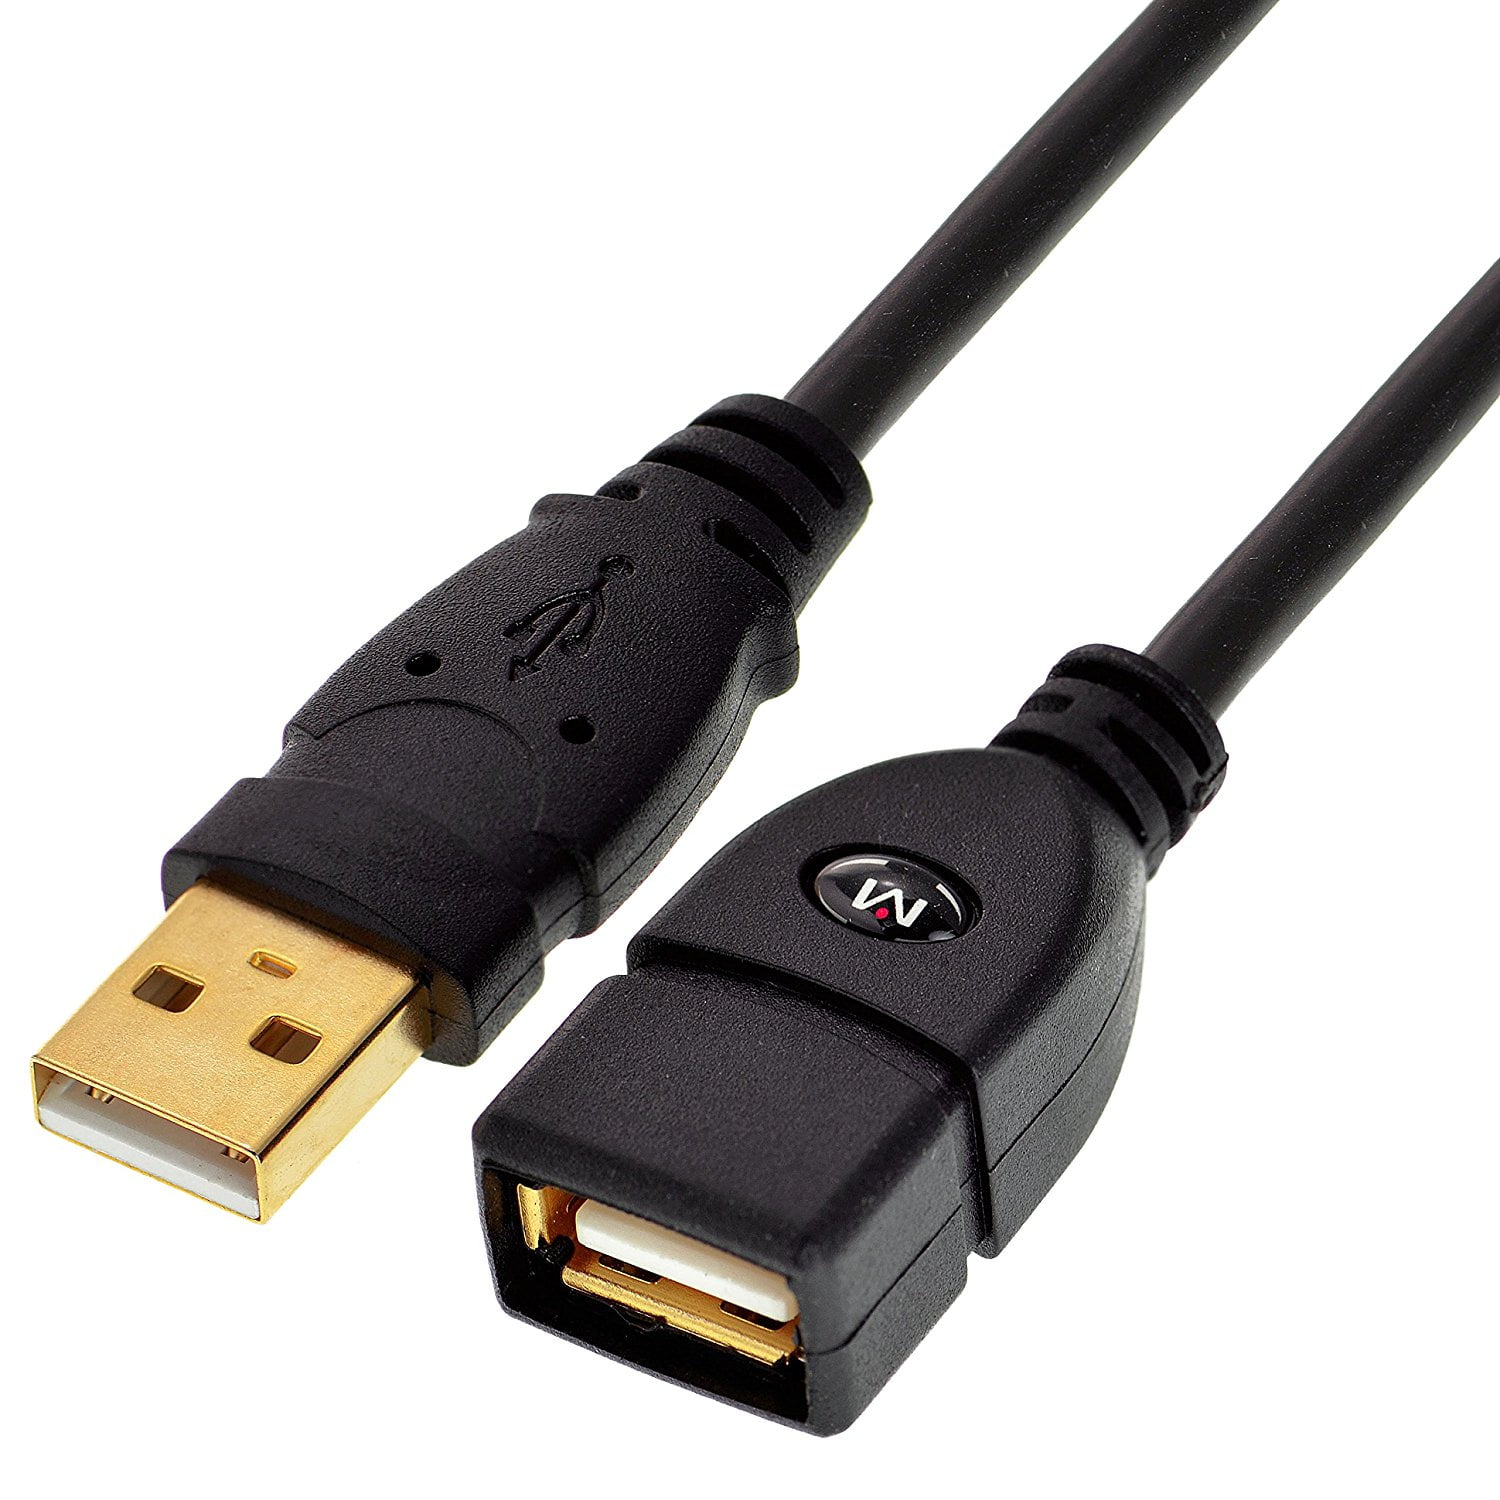 Mediabridge USB 2.0 - USB Extension Cable (6 Feet) - A Male to A Female Gold-Plated Contacts (Part# ) - Walmart.com